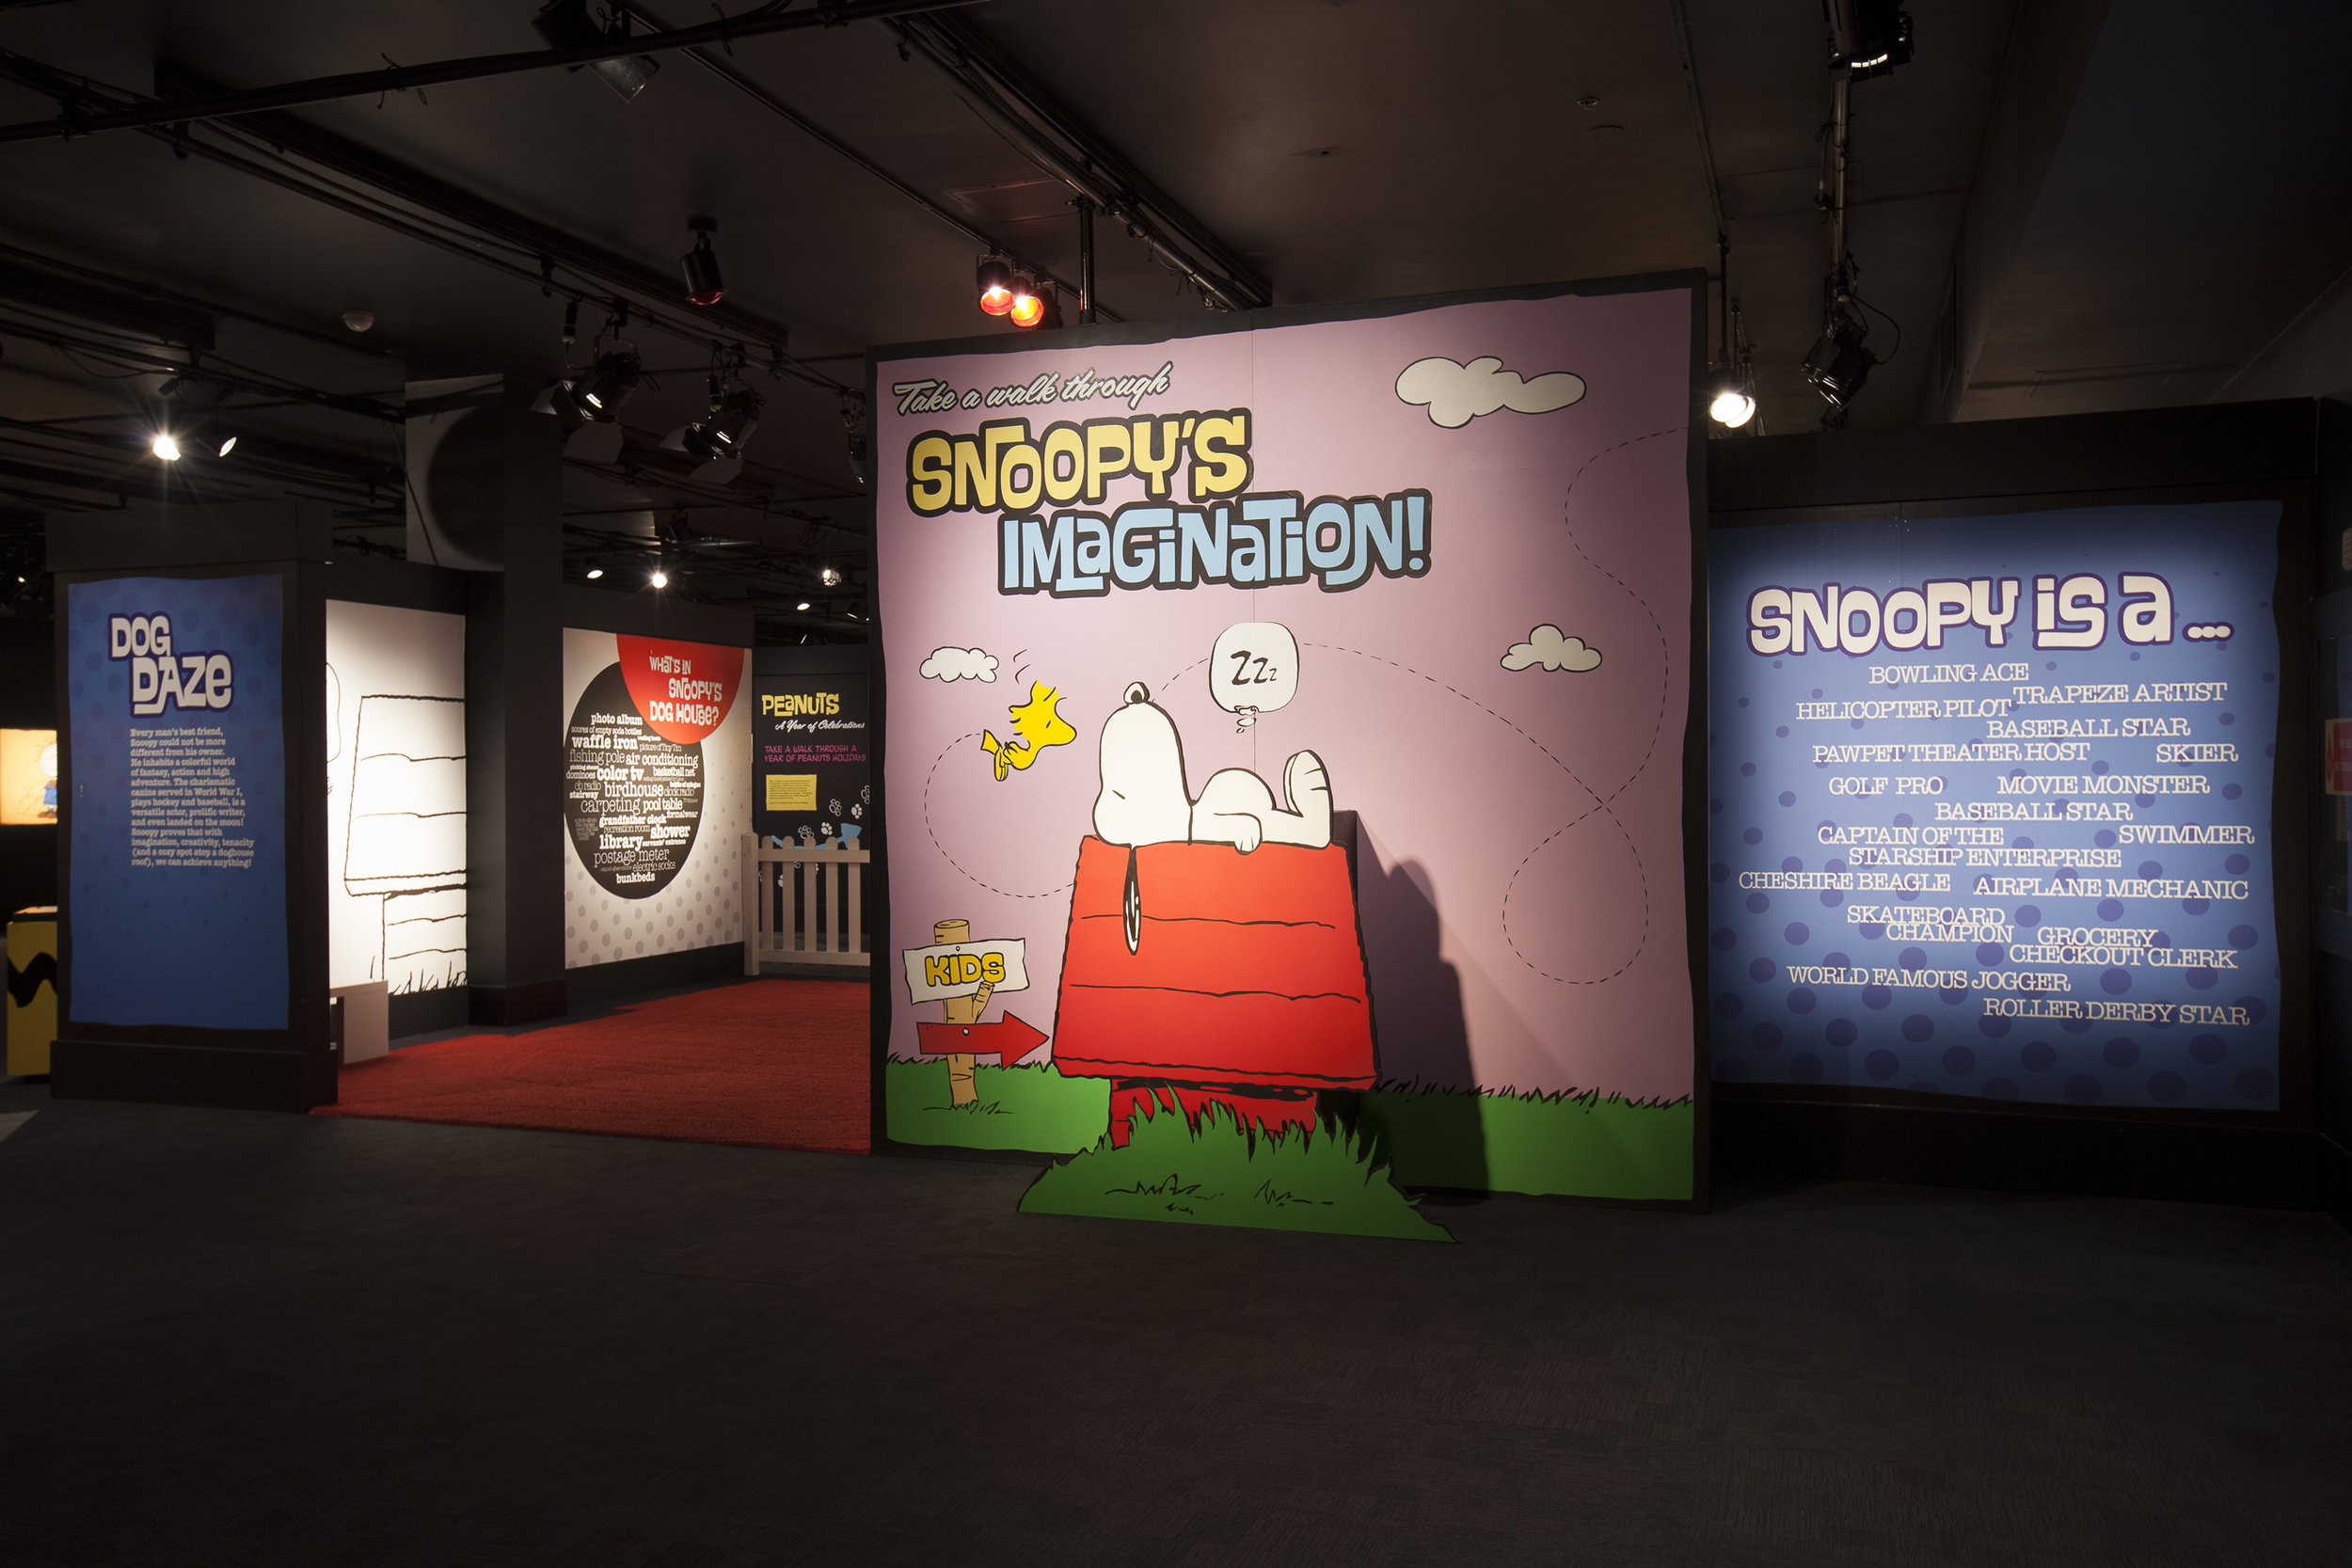 Charlie Brown and the Great Exhibit